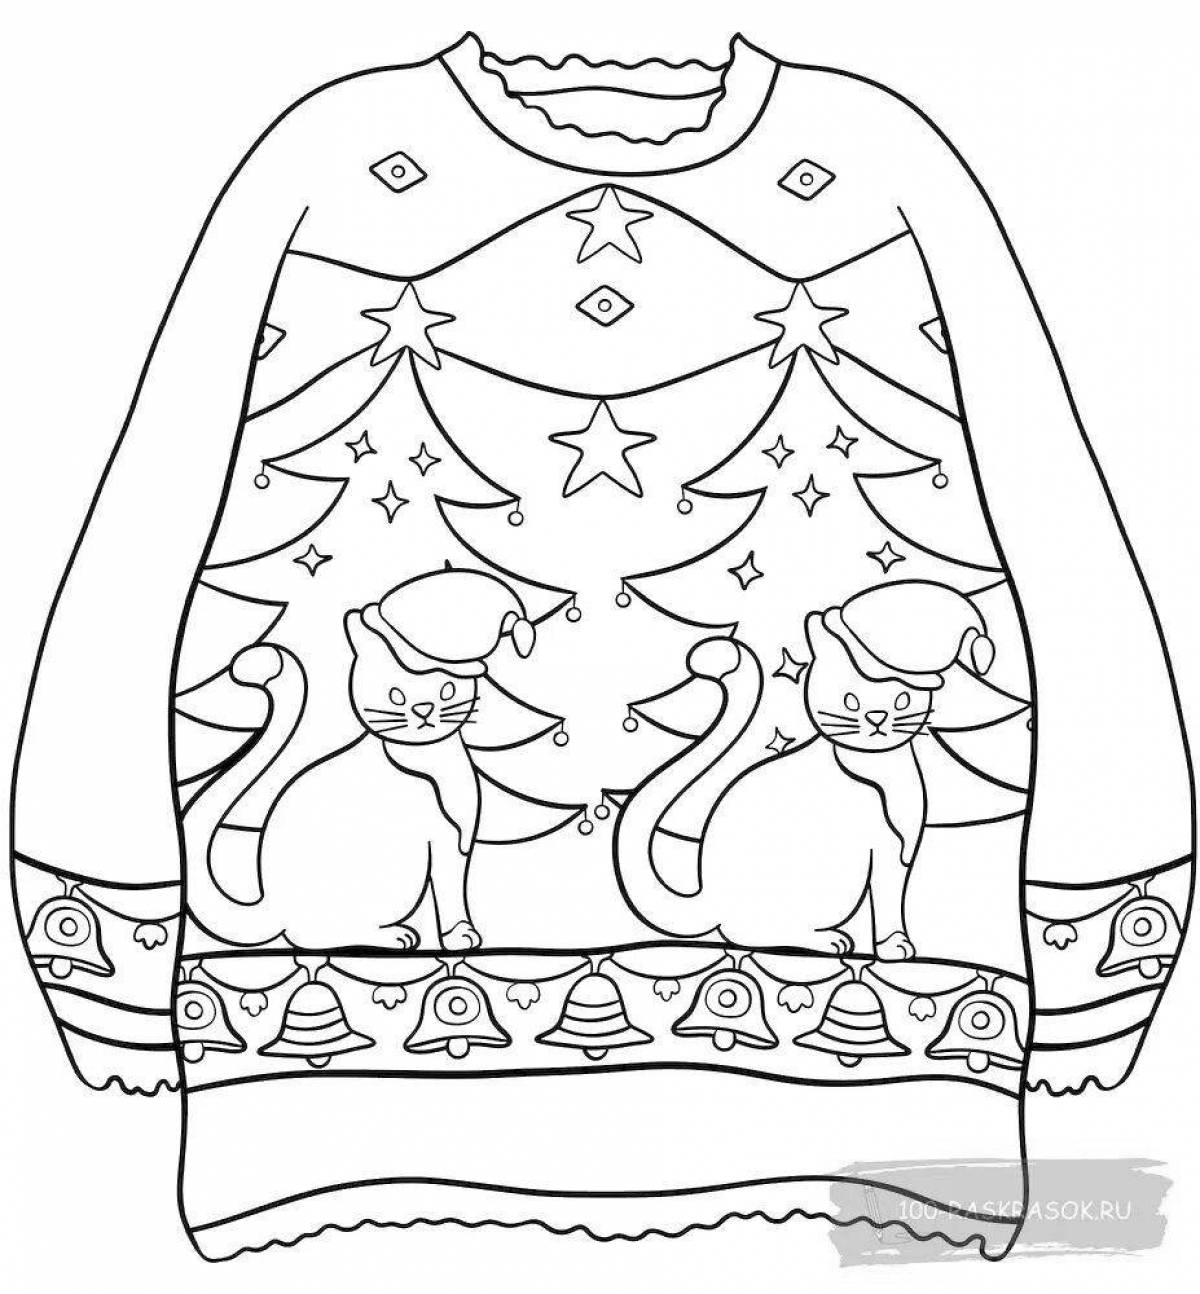 Glamorous jumper coloring page